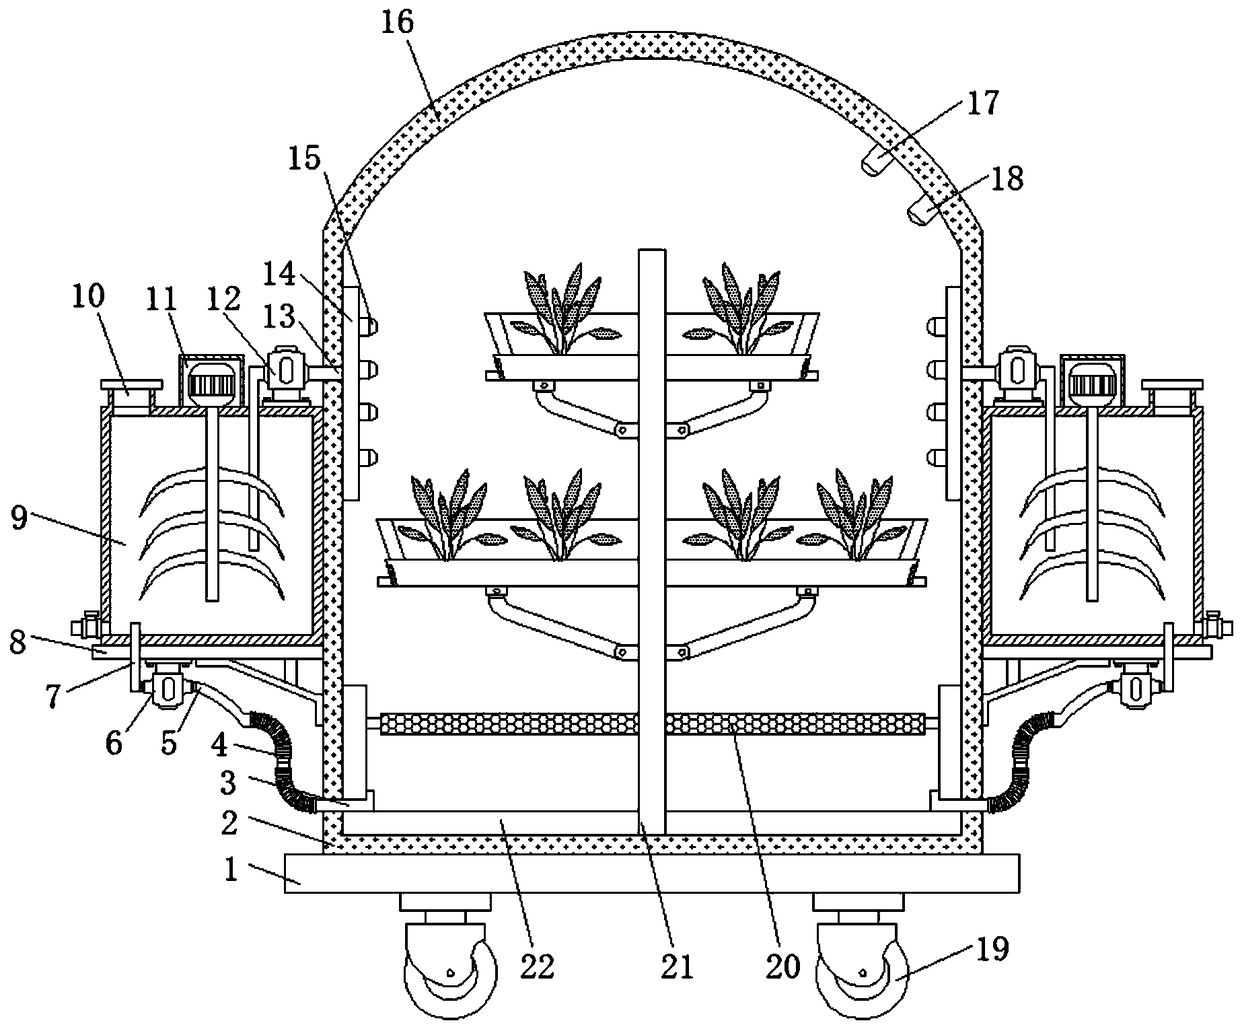 Circulating agricultural planting rack for agricultural planting